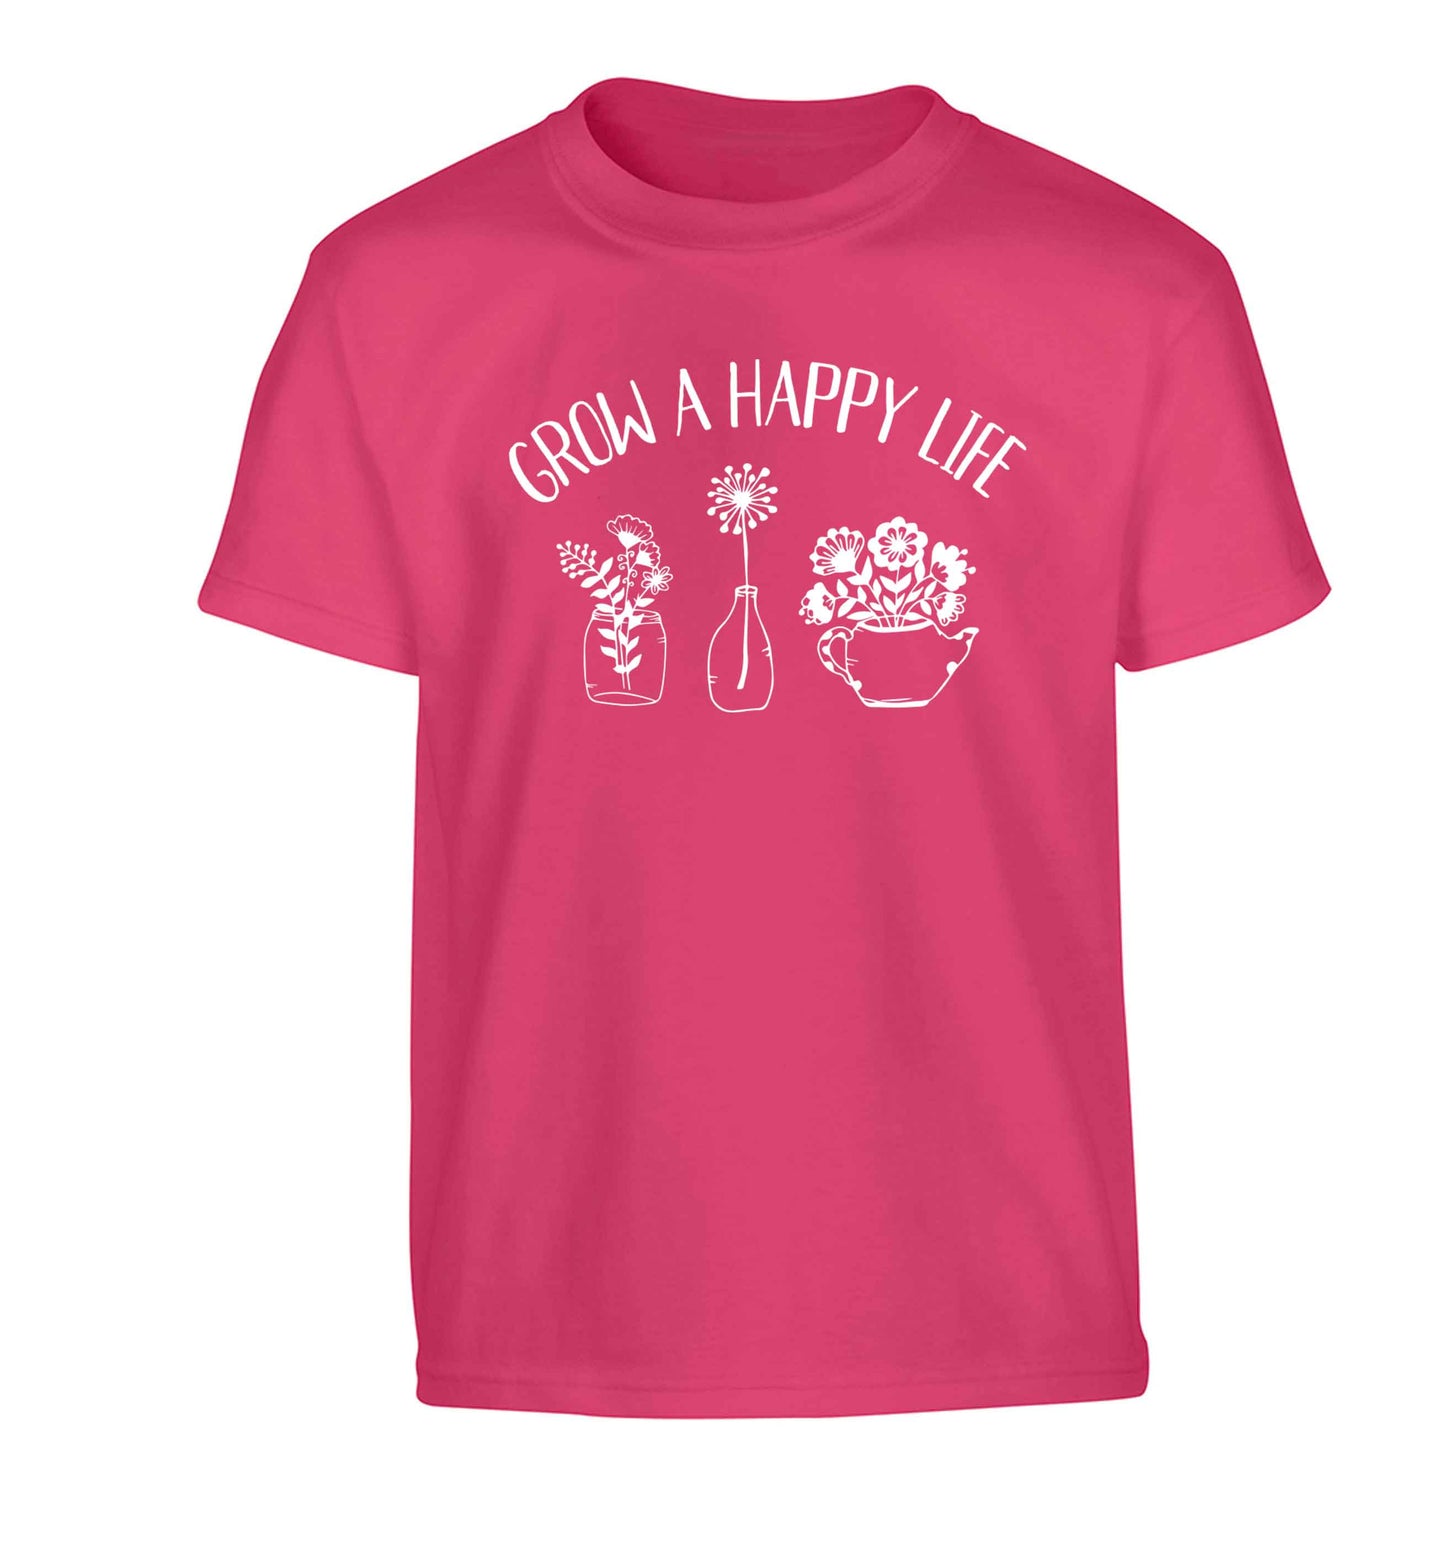 Grow a happy life Children's pink Tshirt 12-13 Years